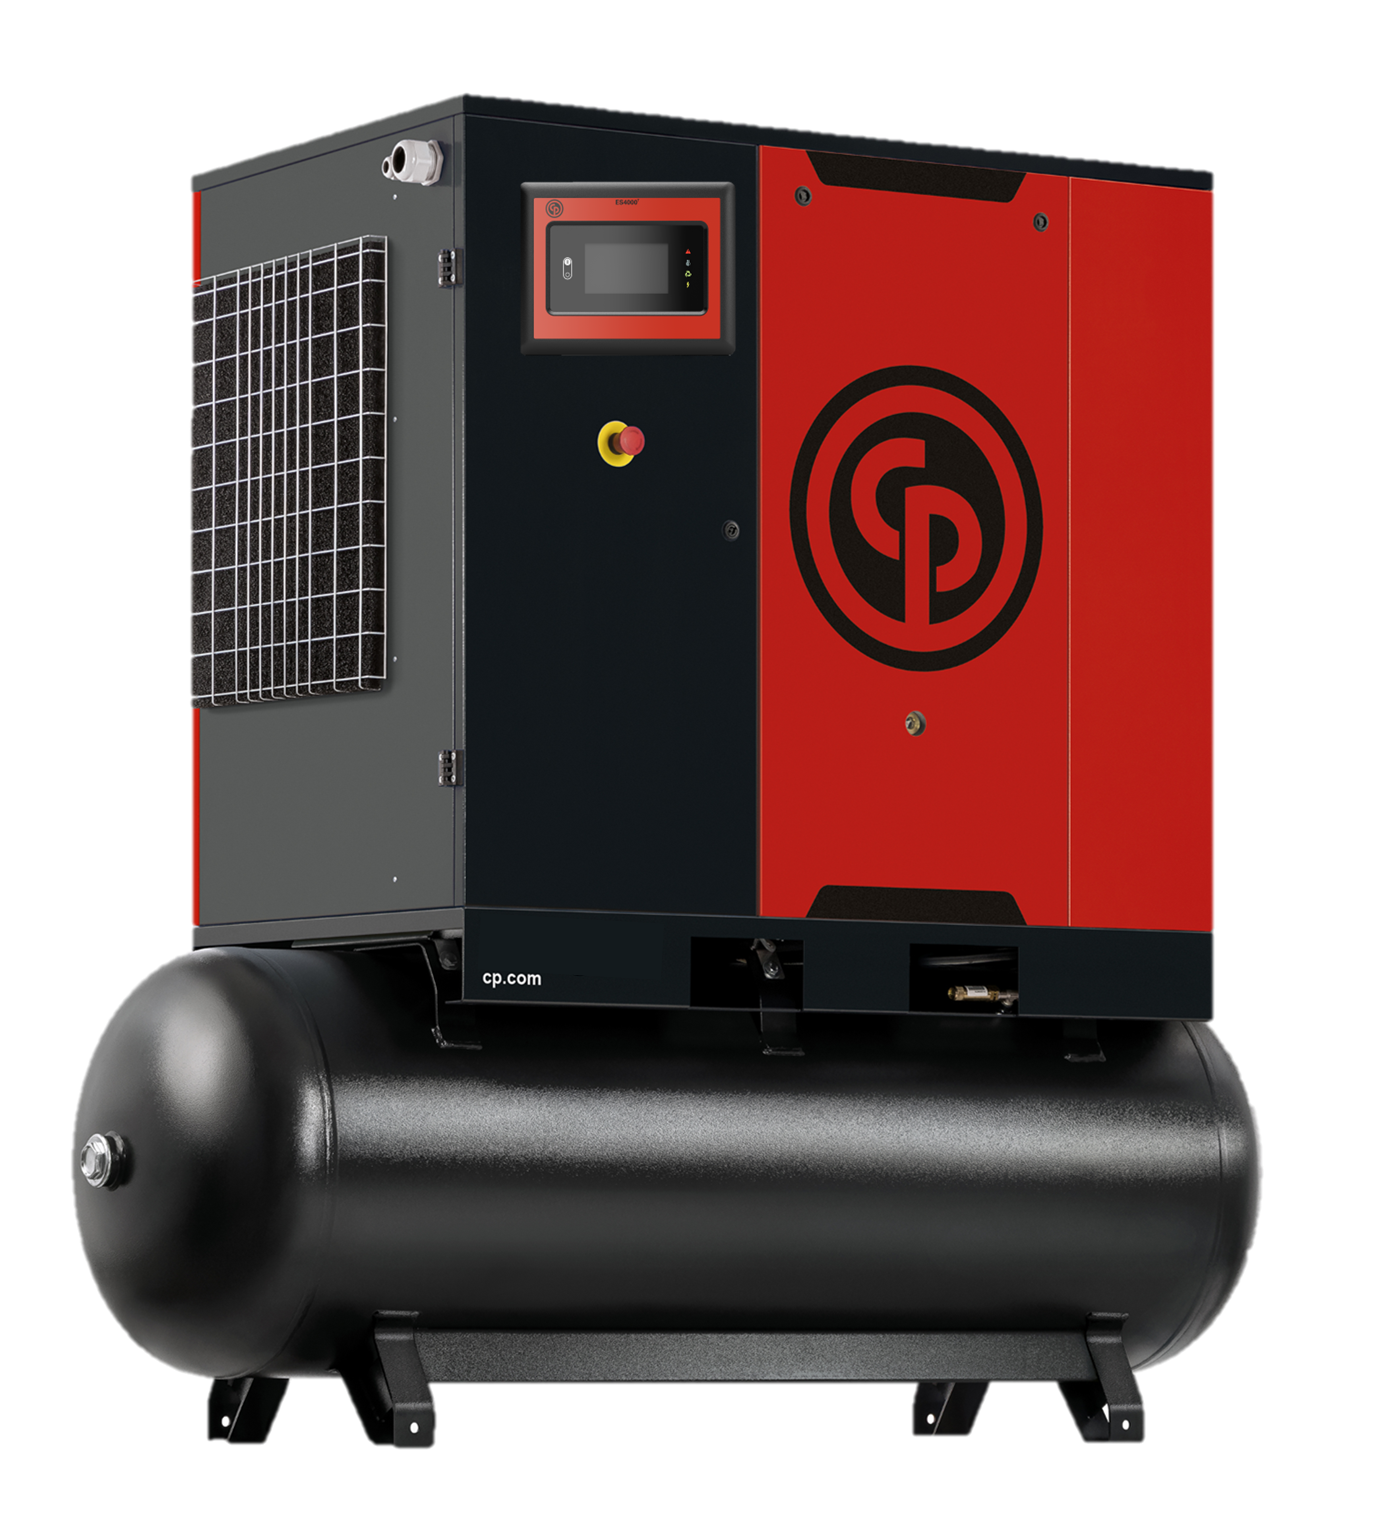 Chicago Pneumatic CPBg 35 HP Tank Mount w. Integrated Dryer Rotary Screw Air Compressor | 129.9 CFM@150 PSI, 208-230/460 volt, 3 Phase | 4152030686